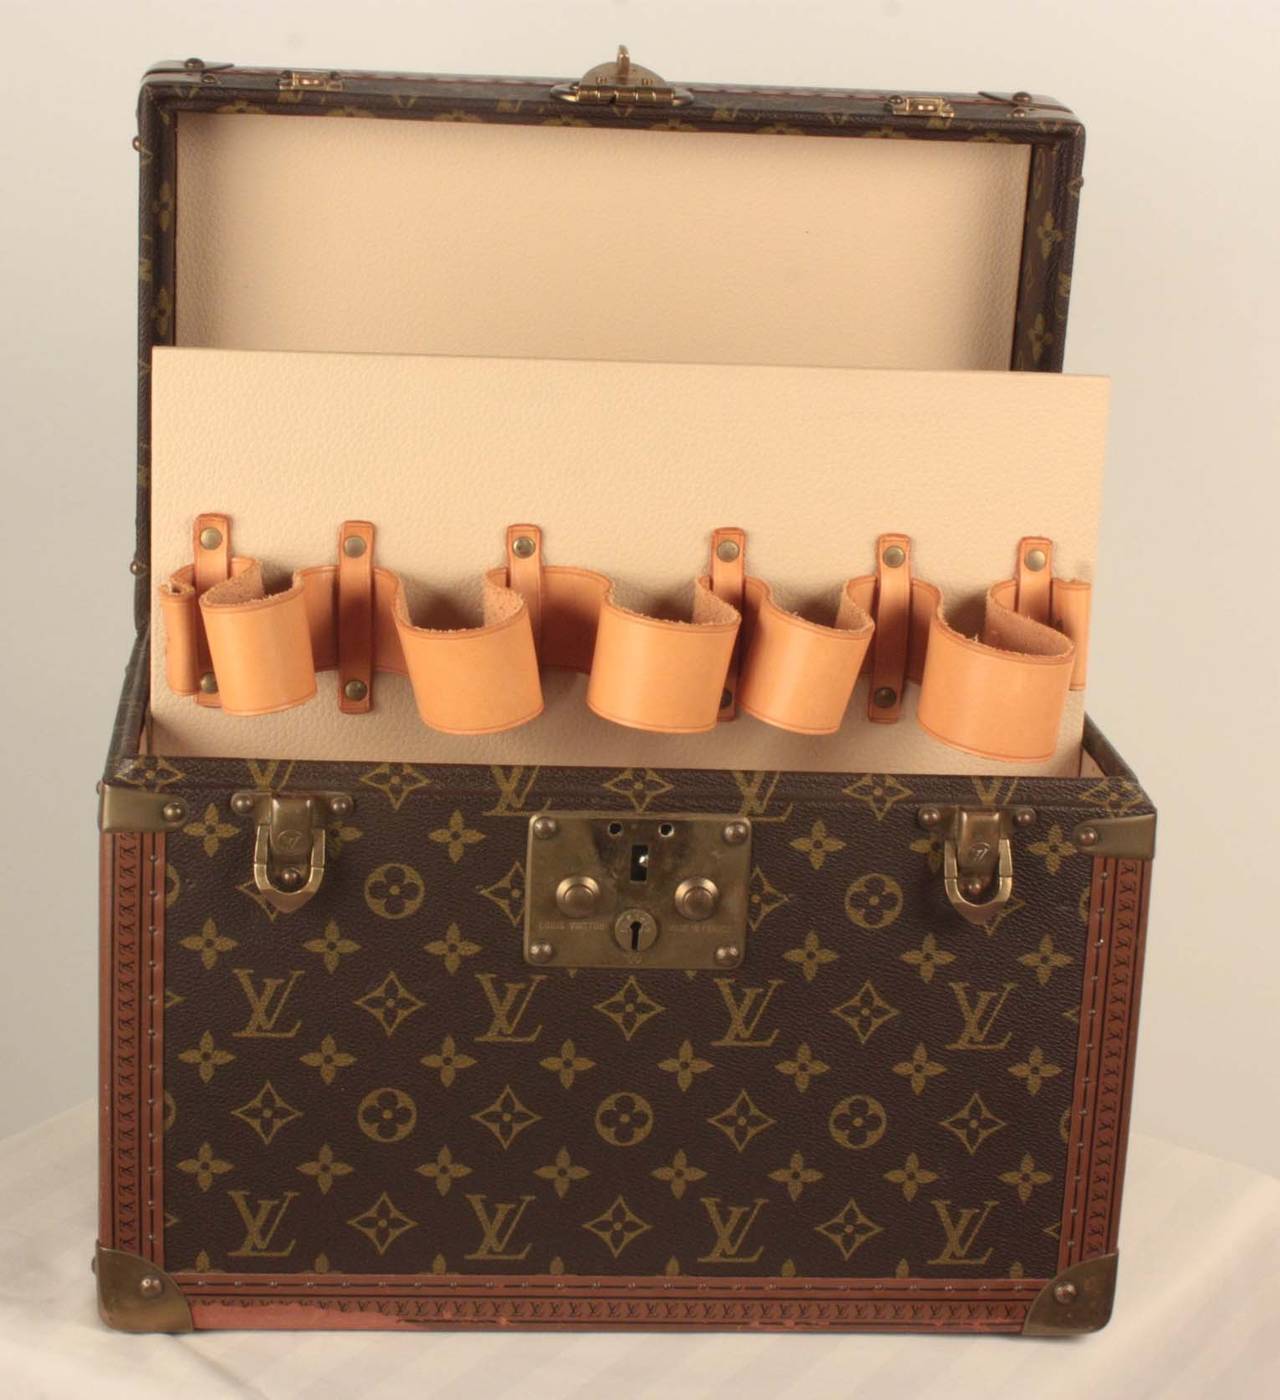 Louis Vuitton Train Case For Sale at 1stdibs